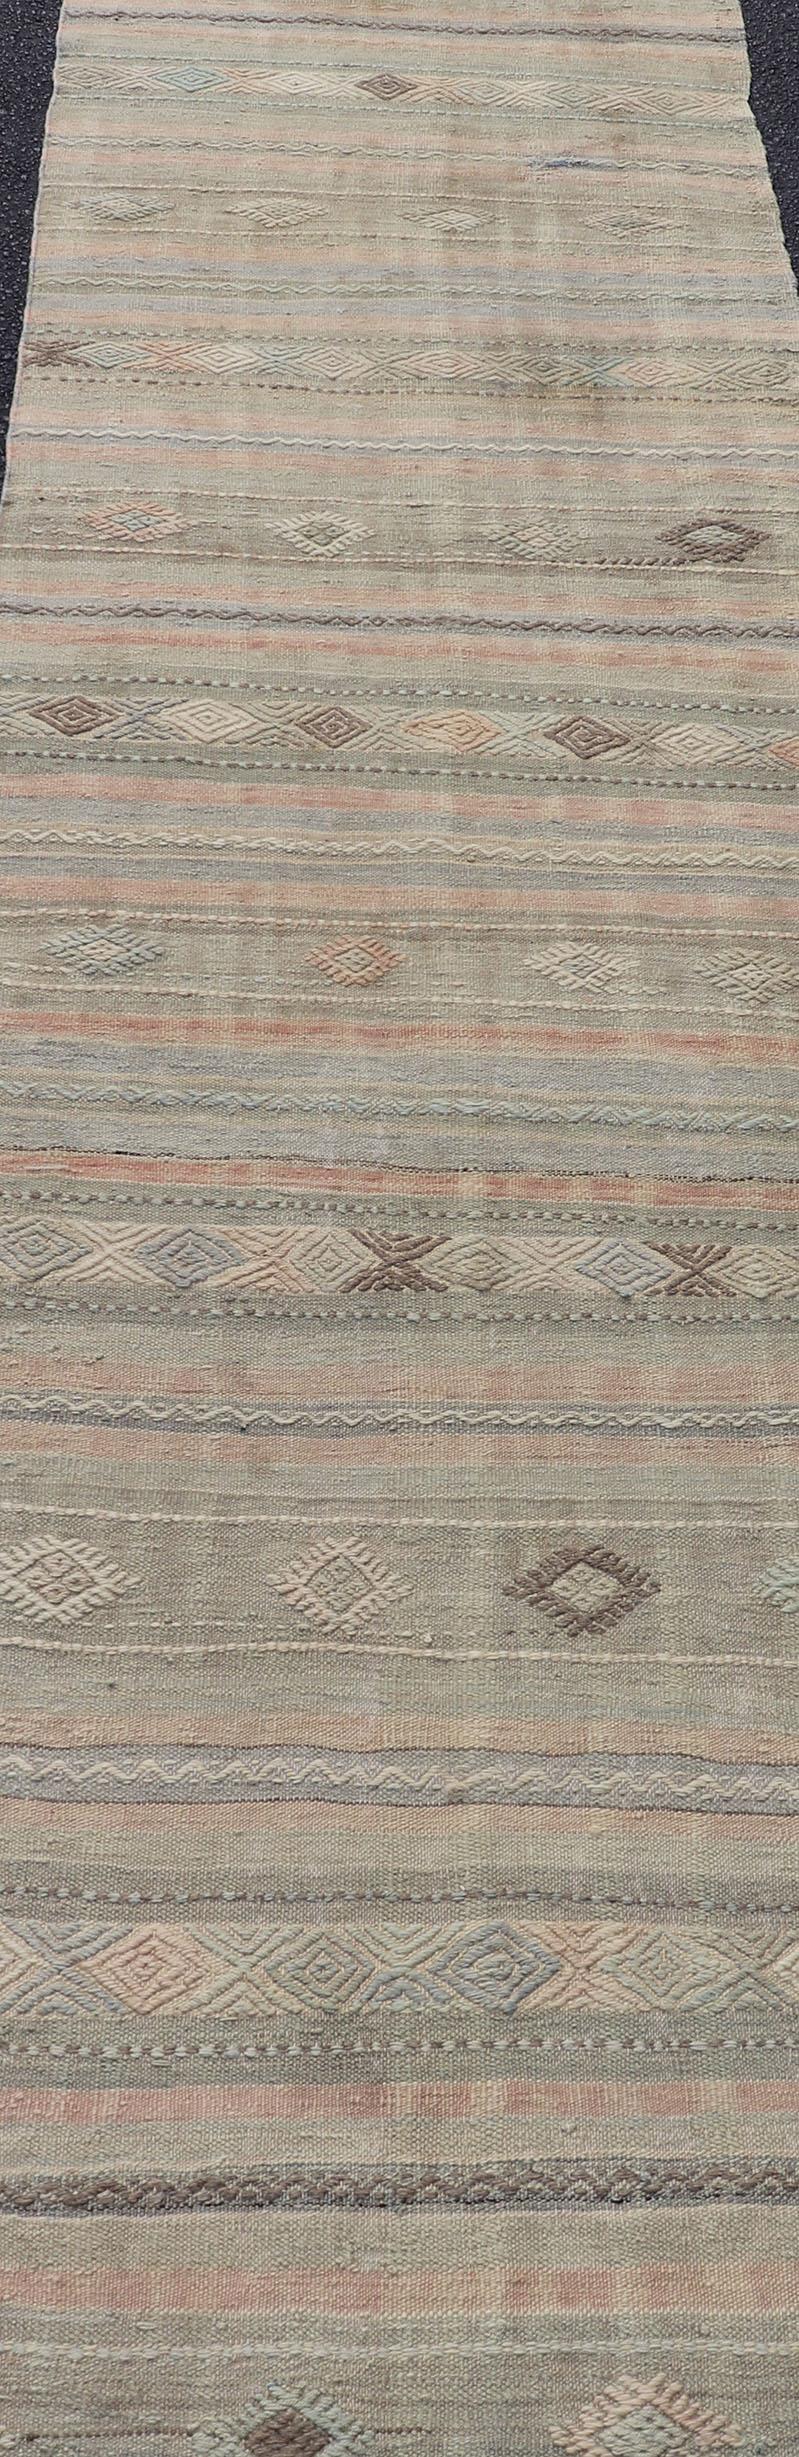 Geometric Embroidered Vintage Turkish Flat-Weave Runner in Warm Tones For Sale 2